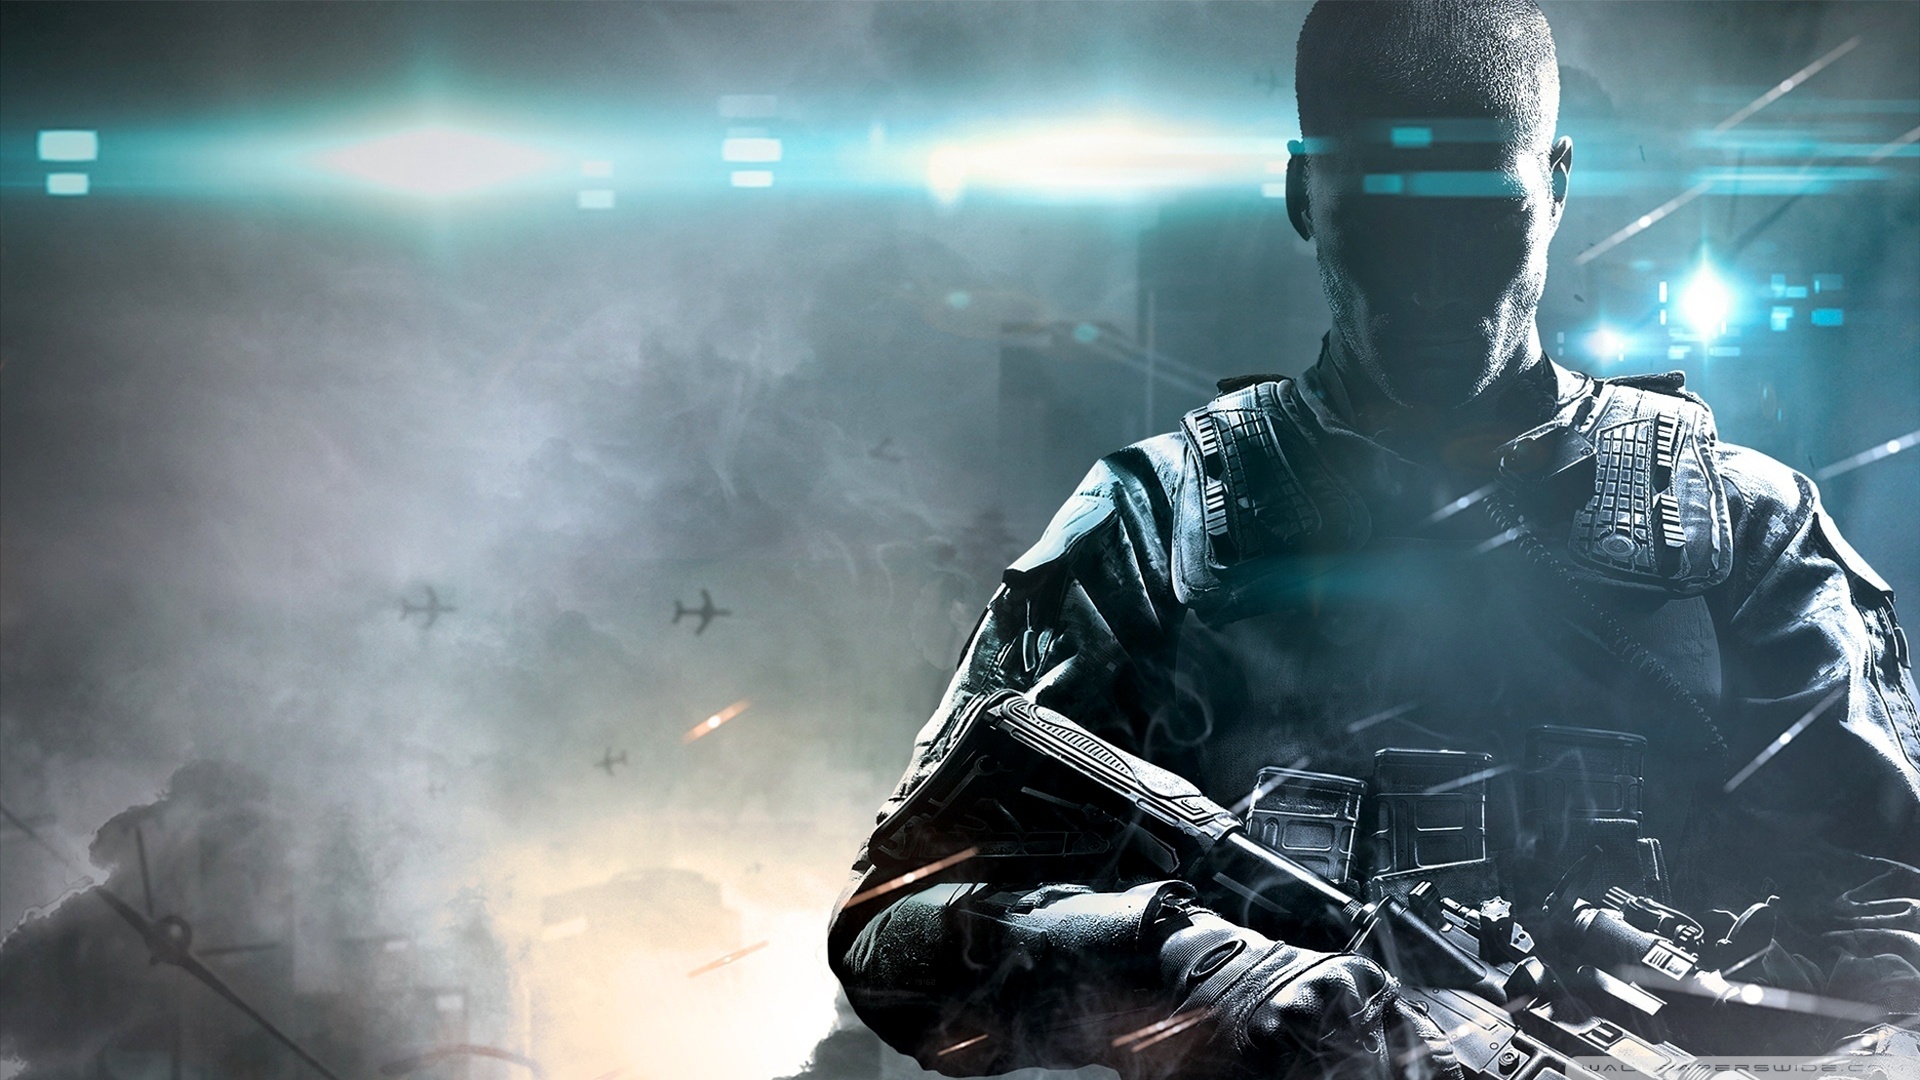 Call Of Duty Black Ops Ii 4 wallpaper 1920x1080 by ArshyBoii on